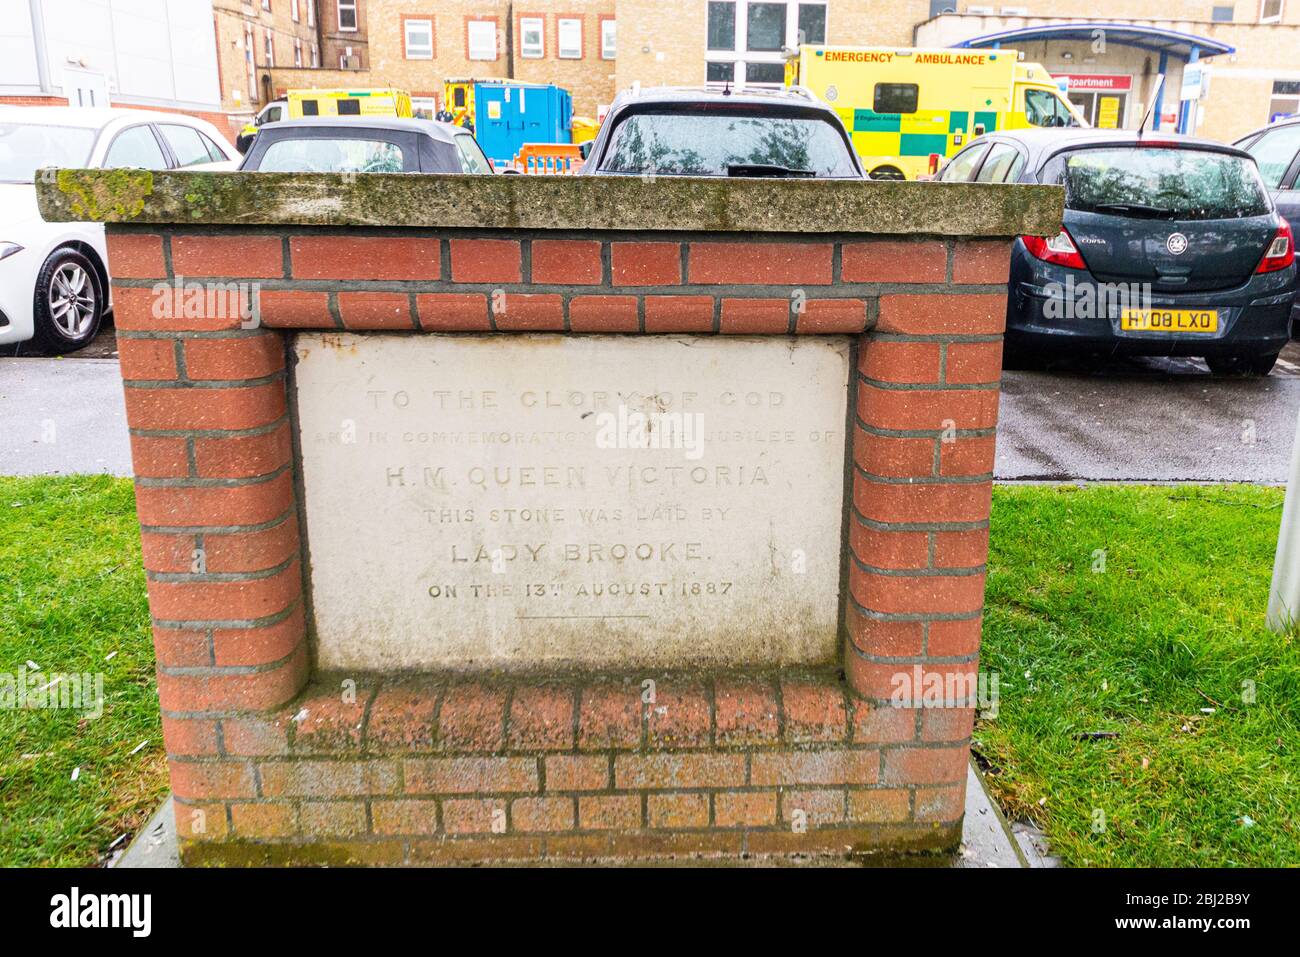 Stone laid by Lady Brooke at Southend Hospital in 1887, Essex, UK. Commemorating Queen Victoria's golden jubilee. COVID-19 bay, ambulances Stock Photo